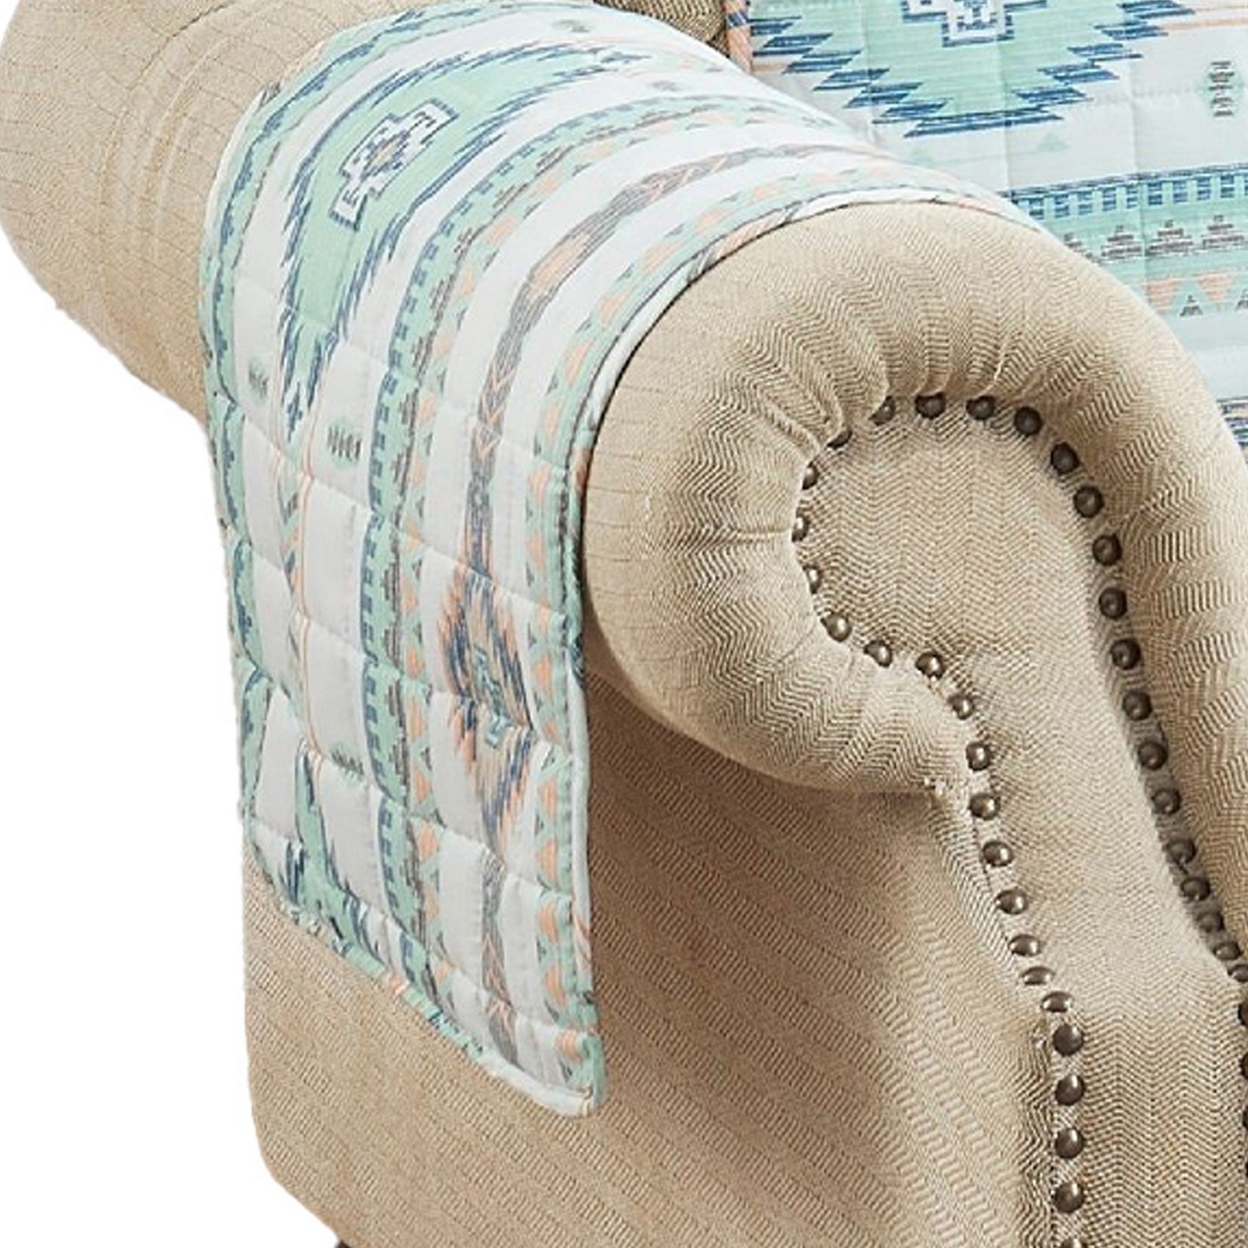 Linda 81 Inch Quilted Armchair Cover, Geometric Prints, Turquoise Polyester-Saltoro Sherpi